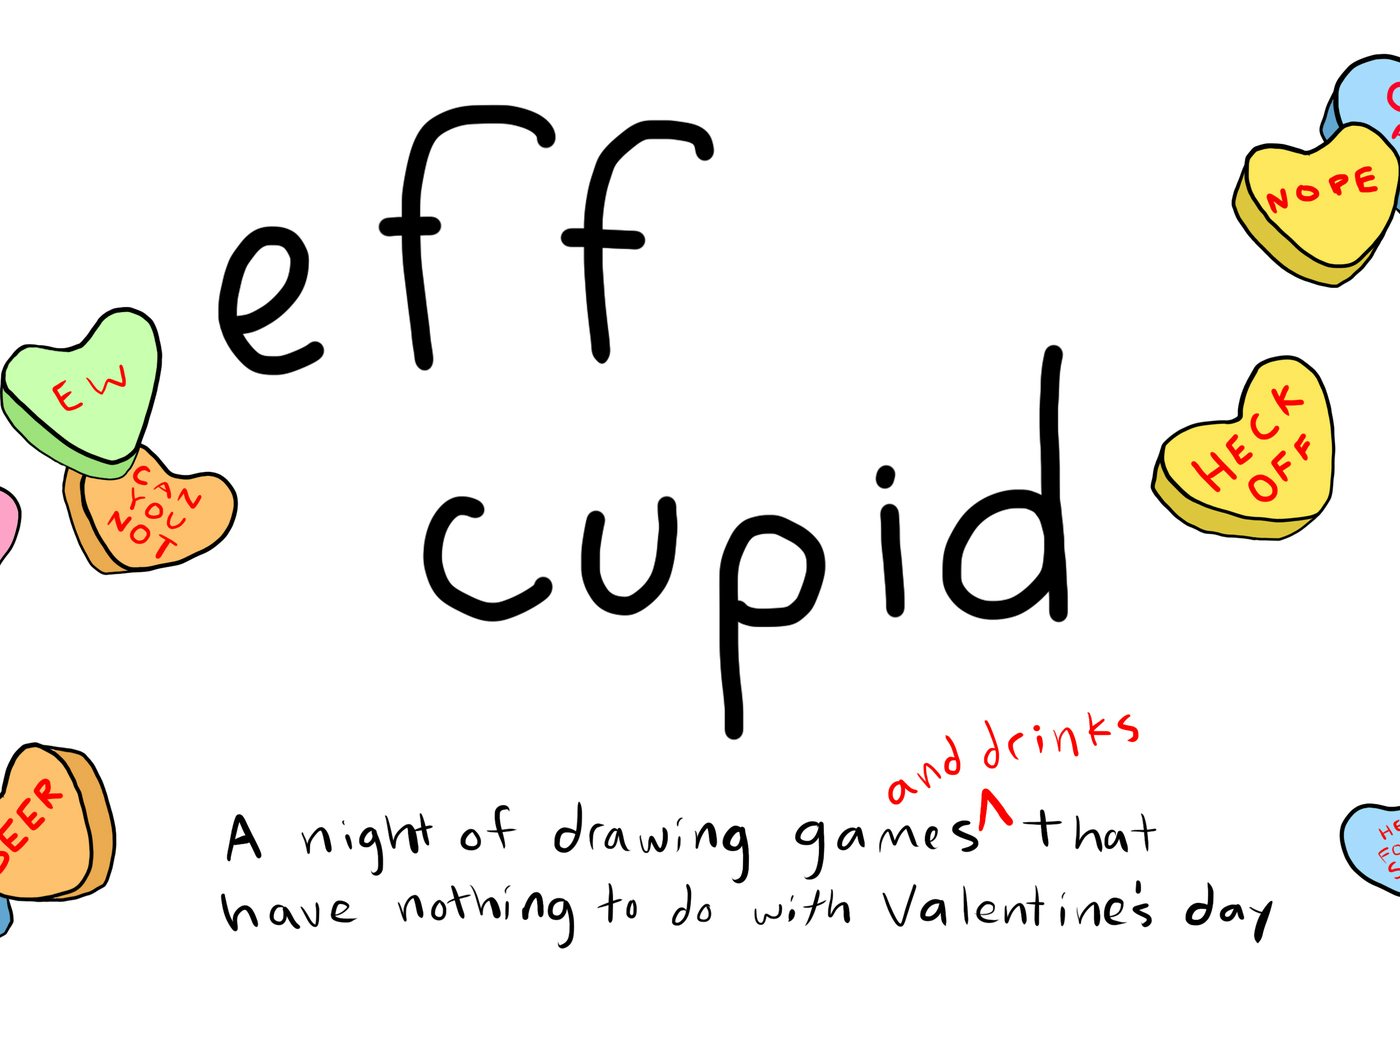 Drink and Draw: F*** Cupid